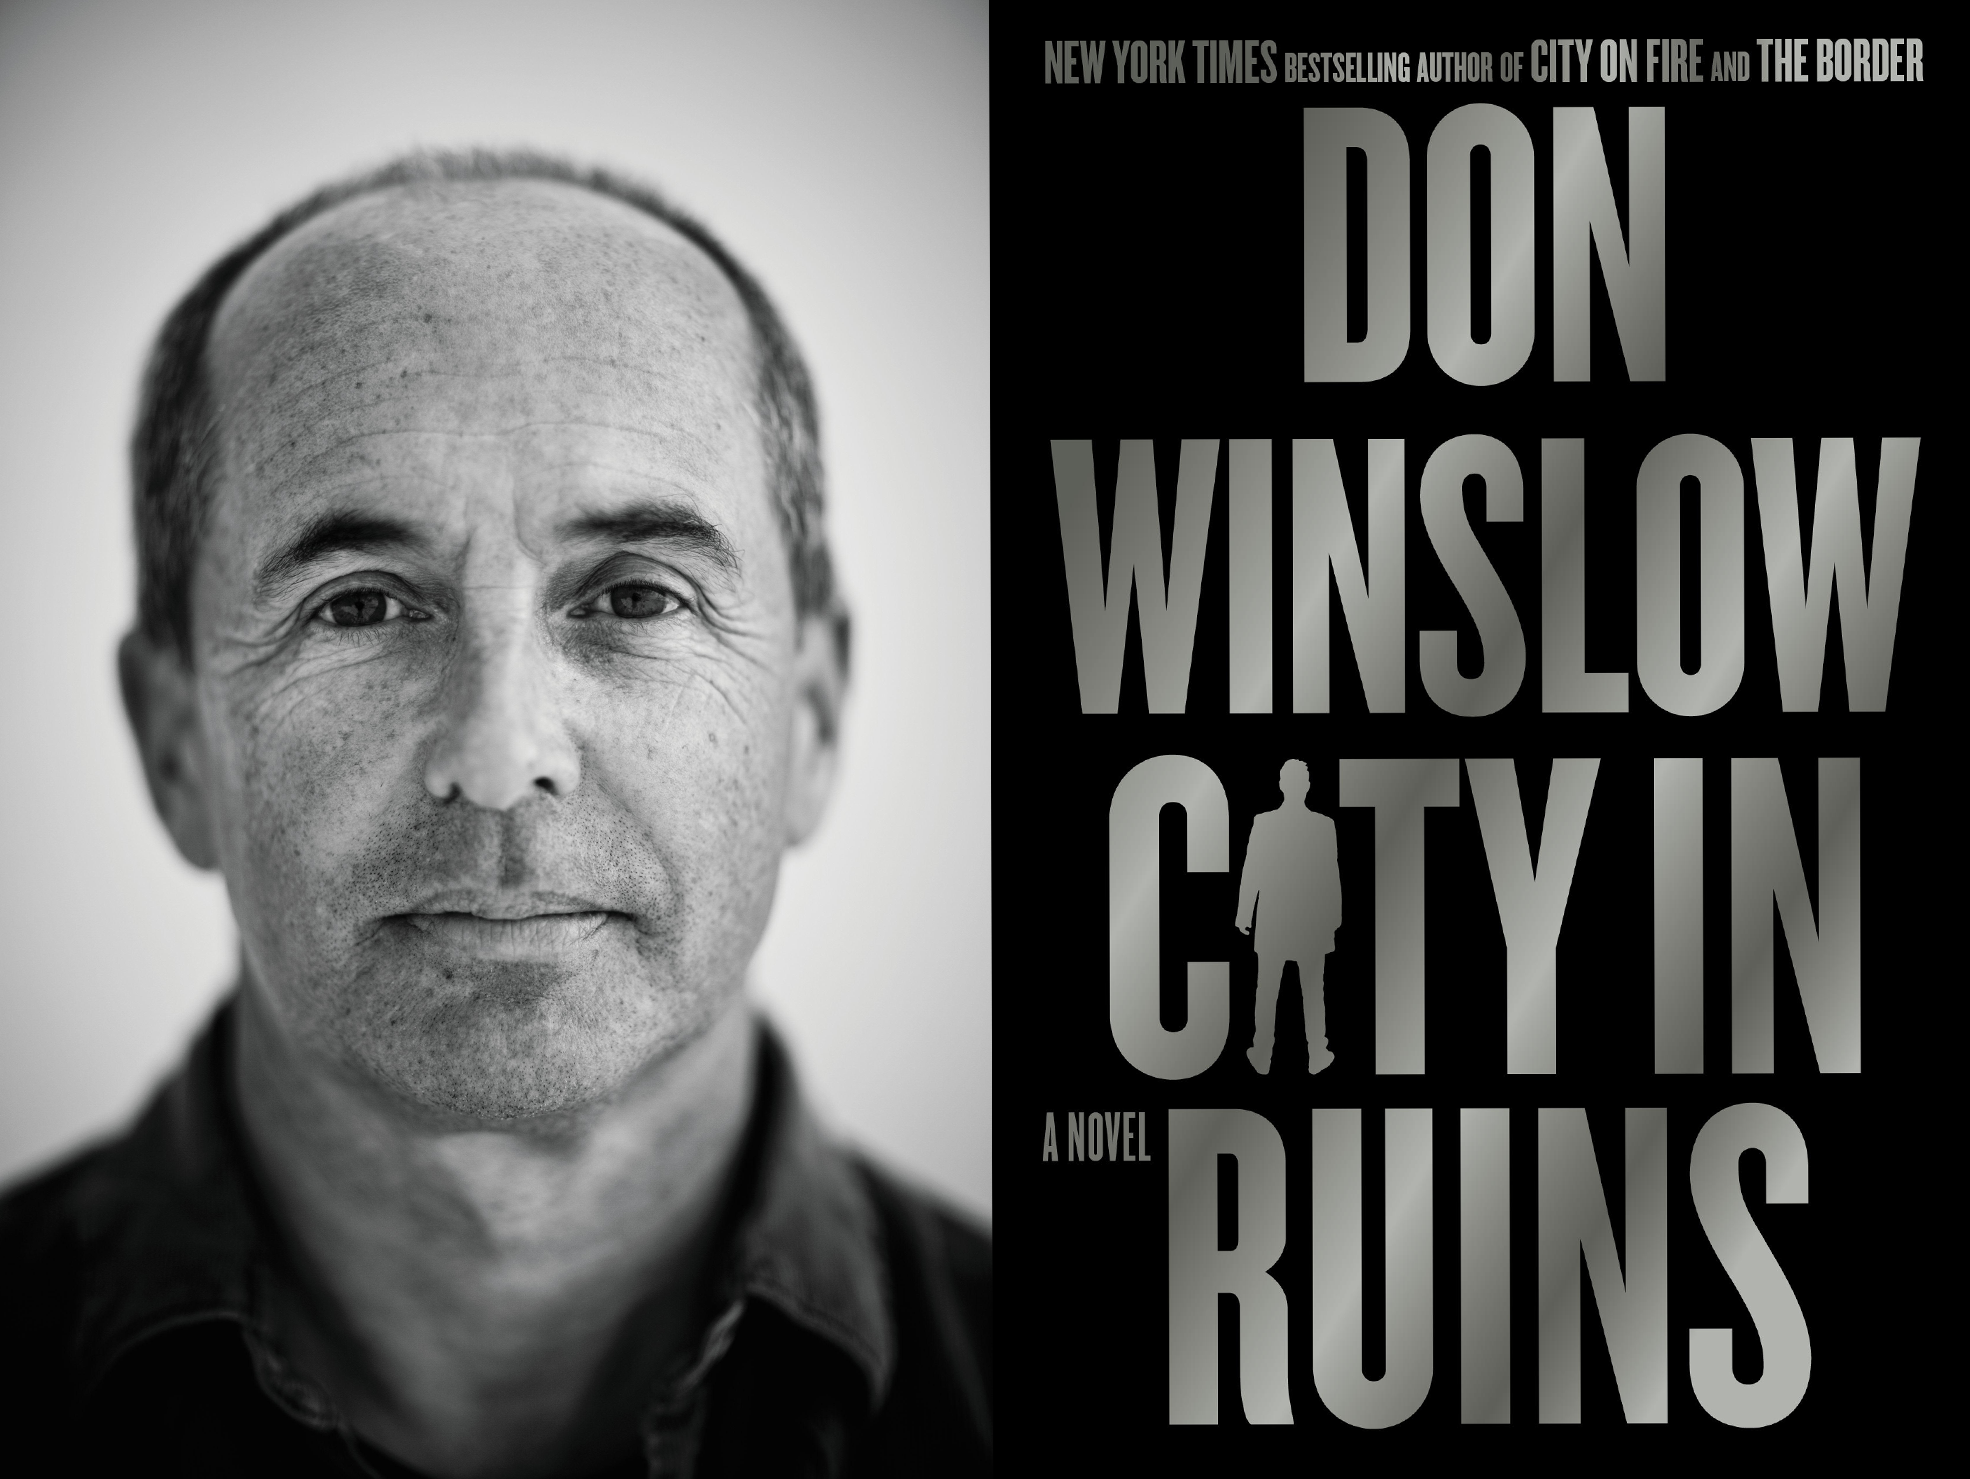 The Kings of Cool' by Don Winslow - The New York Times